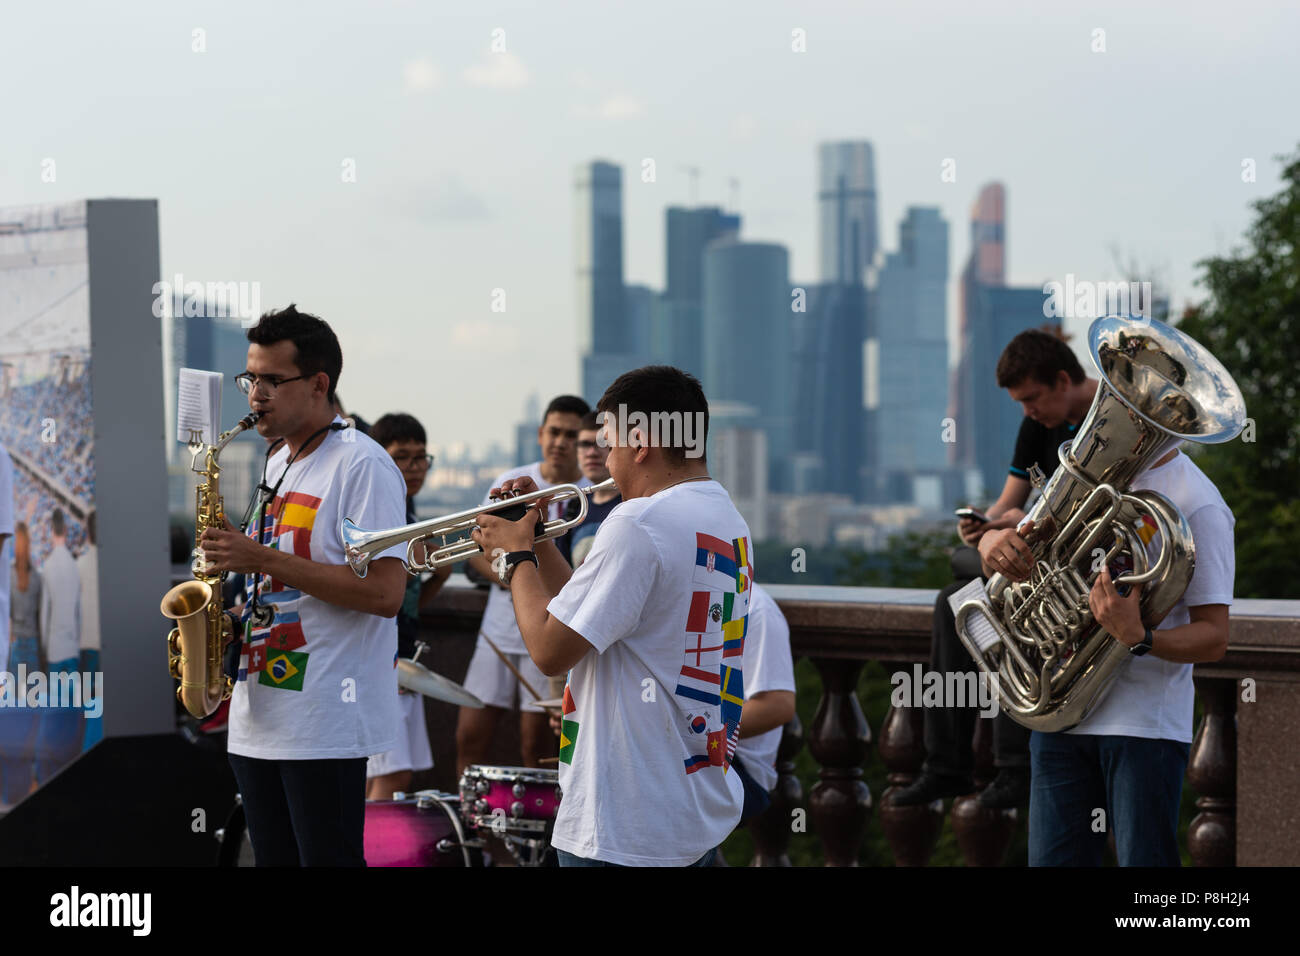 Moscow, Russia. 11th July, 2018. Fan Festival area on Sparrow Hills. Football fans gather to view England vs Croatia semi-final on large TV screens. Concert and activity before the match. In spite of local thunderstorms over Moscow, the festival atmosphere is warm. Orchestra greets the international football fans on the viewing platform. Credit: Alex's Pictures/Alamy Live News Stock Photo